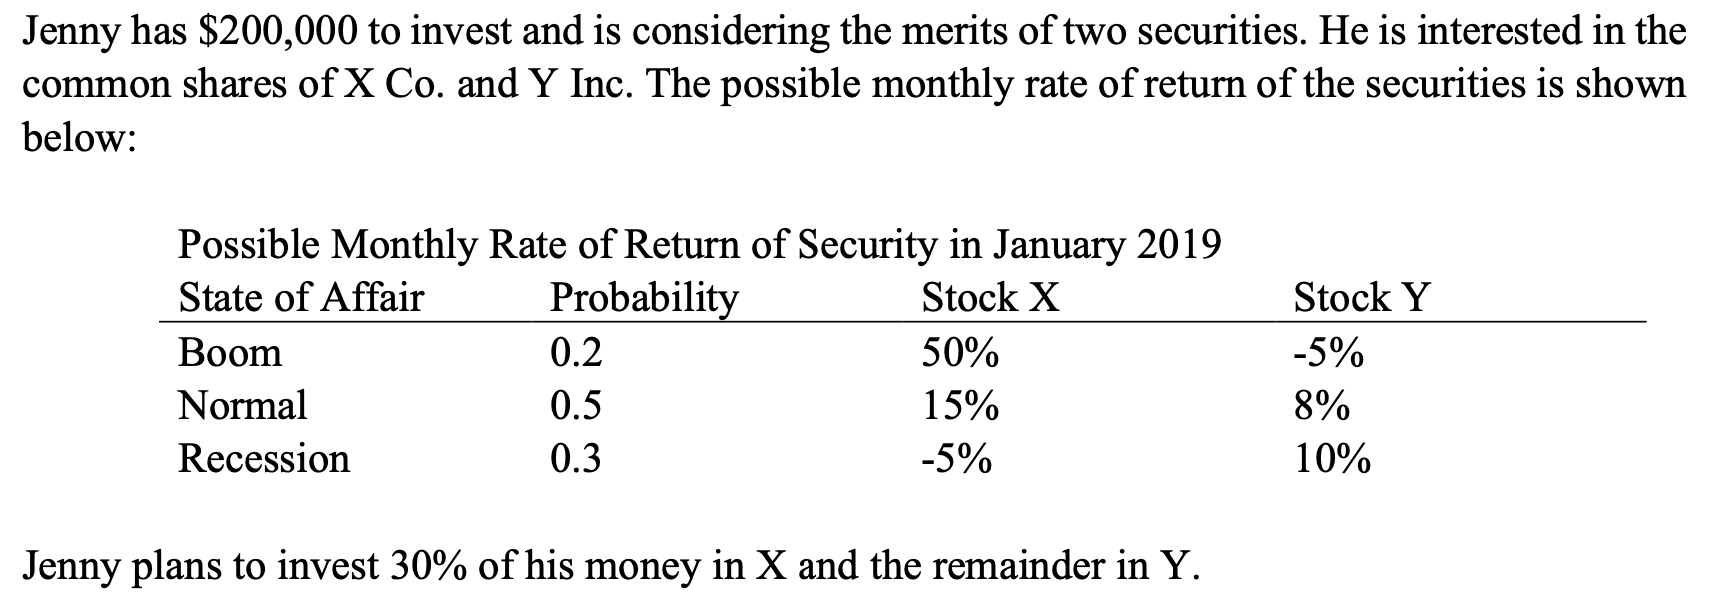 Jenny has $200,000 to invest and is considering the merits of two securities. He is interested in the
common shares of X Co. and Y Inc. The possible monthly rate of return of the securities is shown
below:
Possible Monthly Rate of Return of Security in January 2019
Probability
State of Affair
Stock X
Stock Y
Boom
0.2
50%
-5%
Normal
0.5
15%
8%
Recession
0.3
-5%
10%
Jenny plans to invest 30% of his money in X and the remainder in Y.
